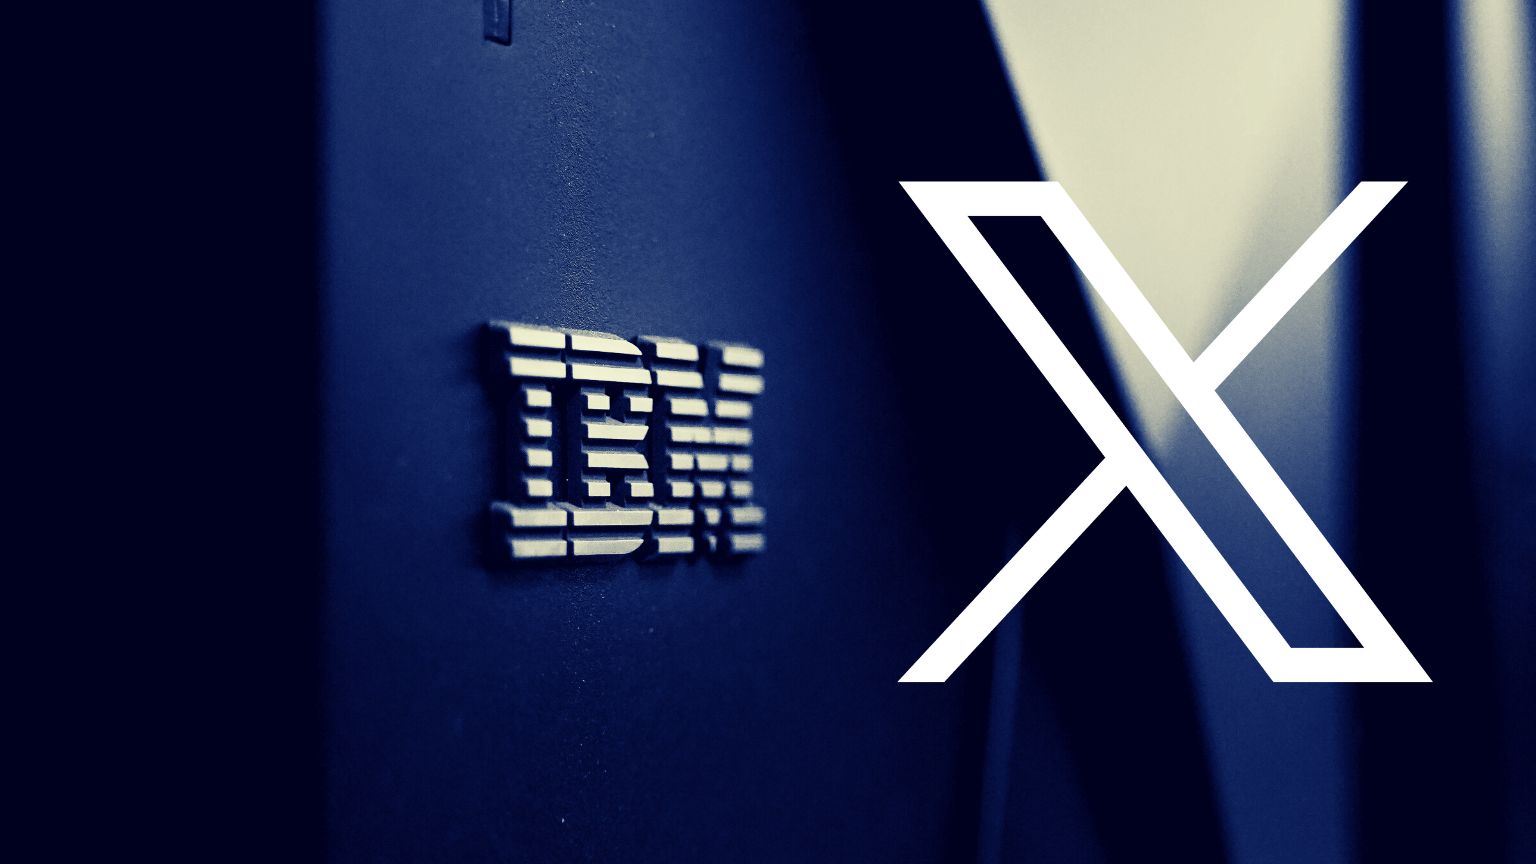 IBM Pulls Ads From X After Activist’s Complaints of Nazi Content